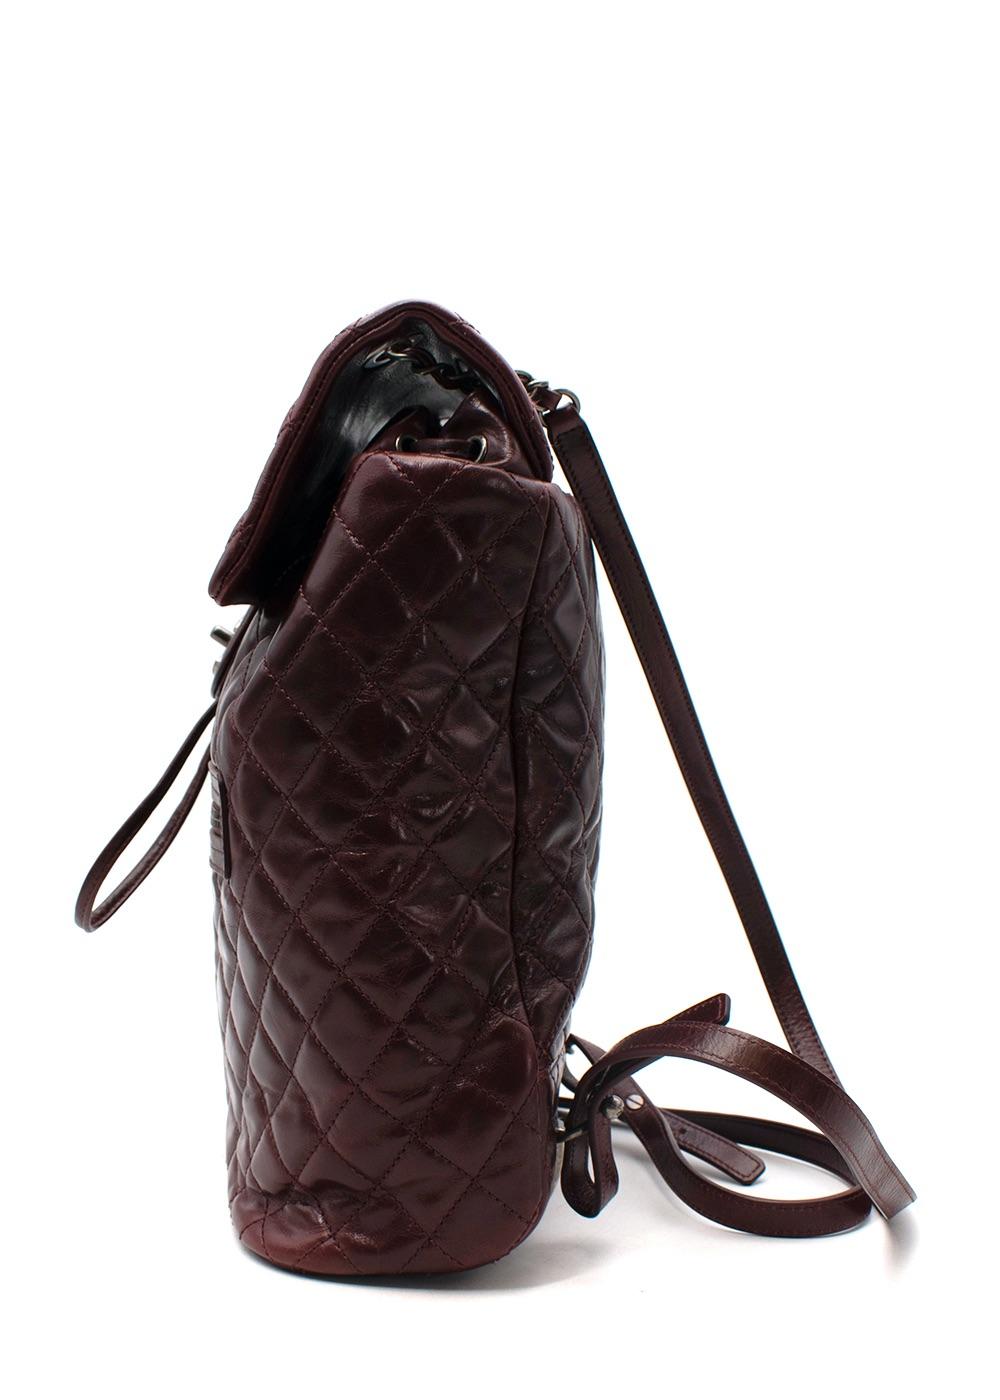 Chanel Burgundy Quilted Leather Urban Spirit Backpack For Sale 4